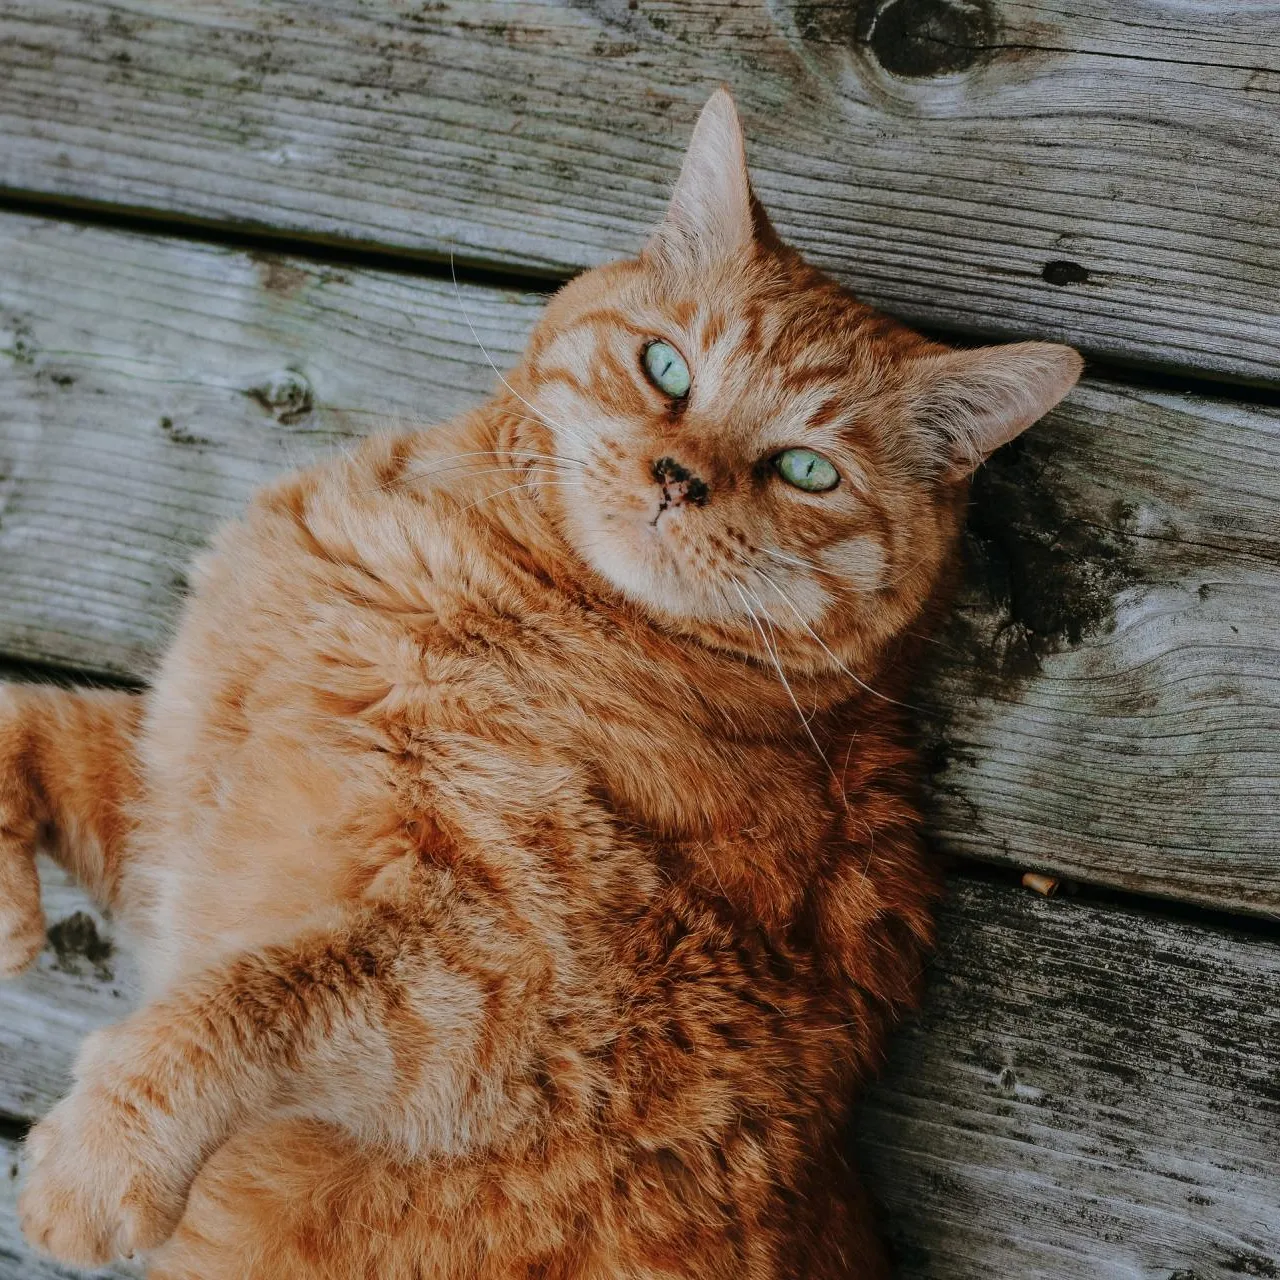 A tan cat with green eyes lounging on a deck